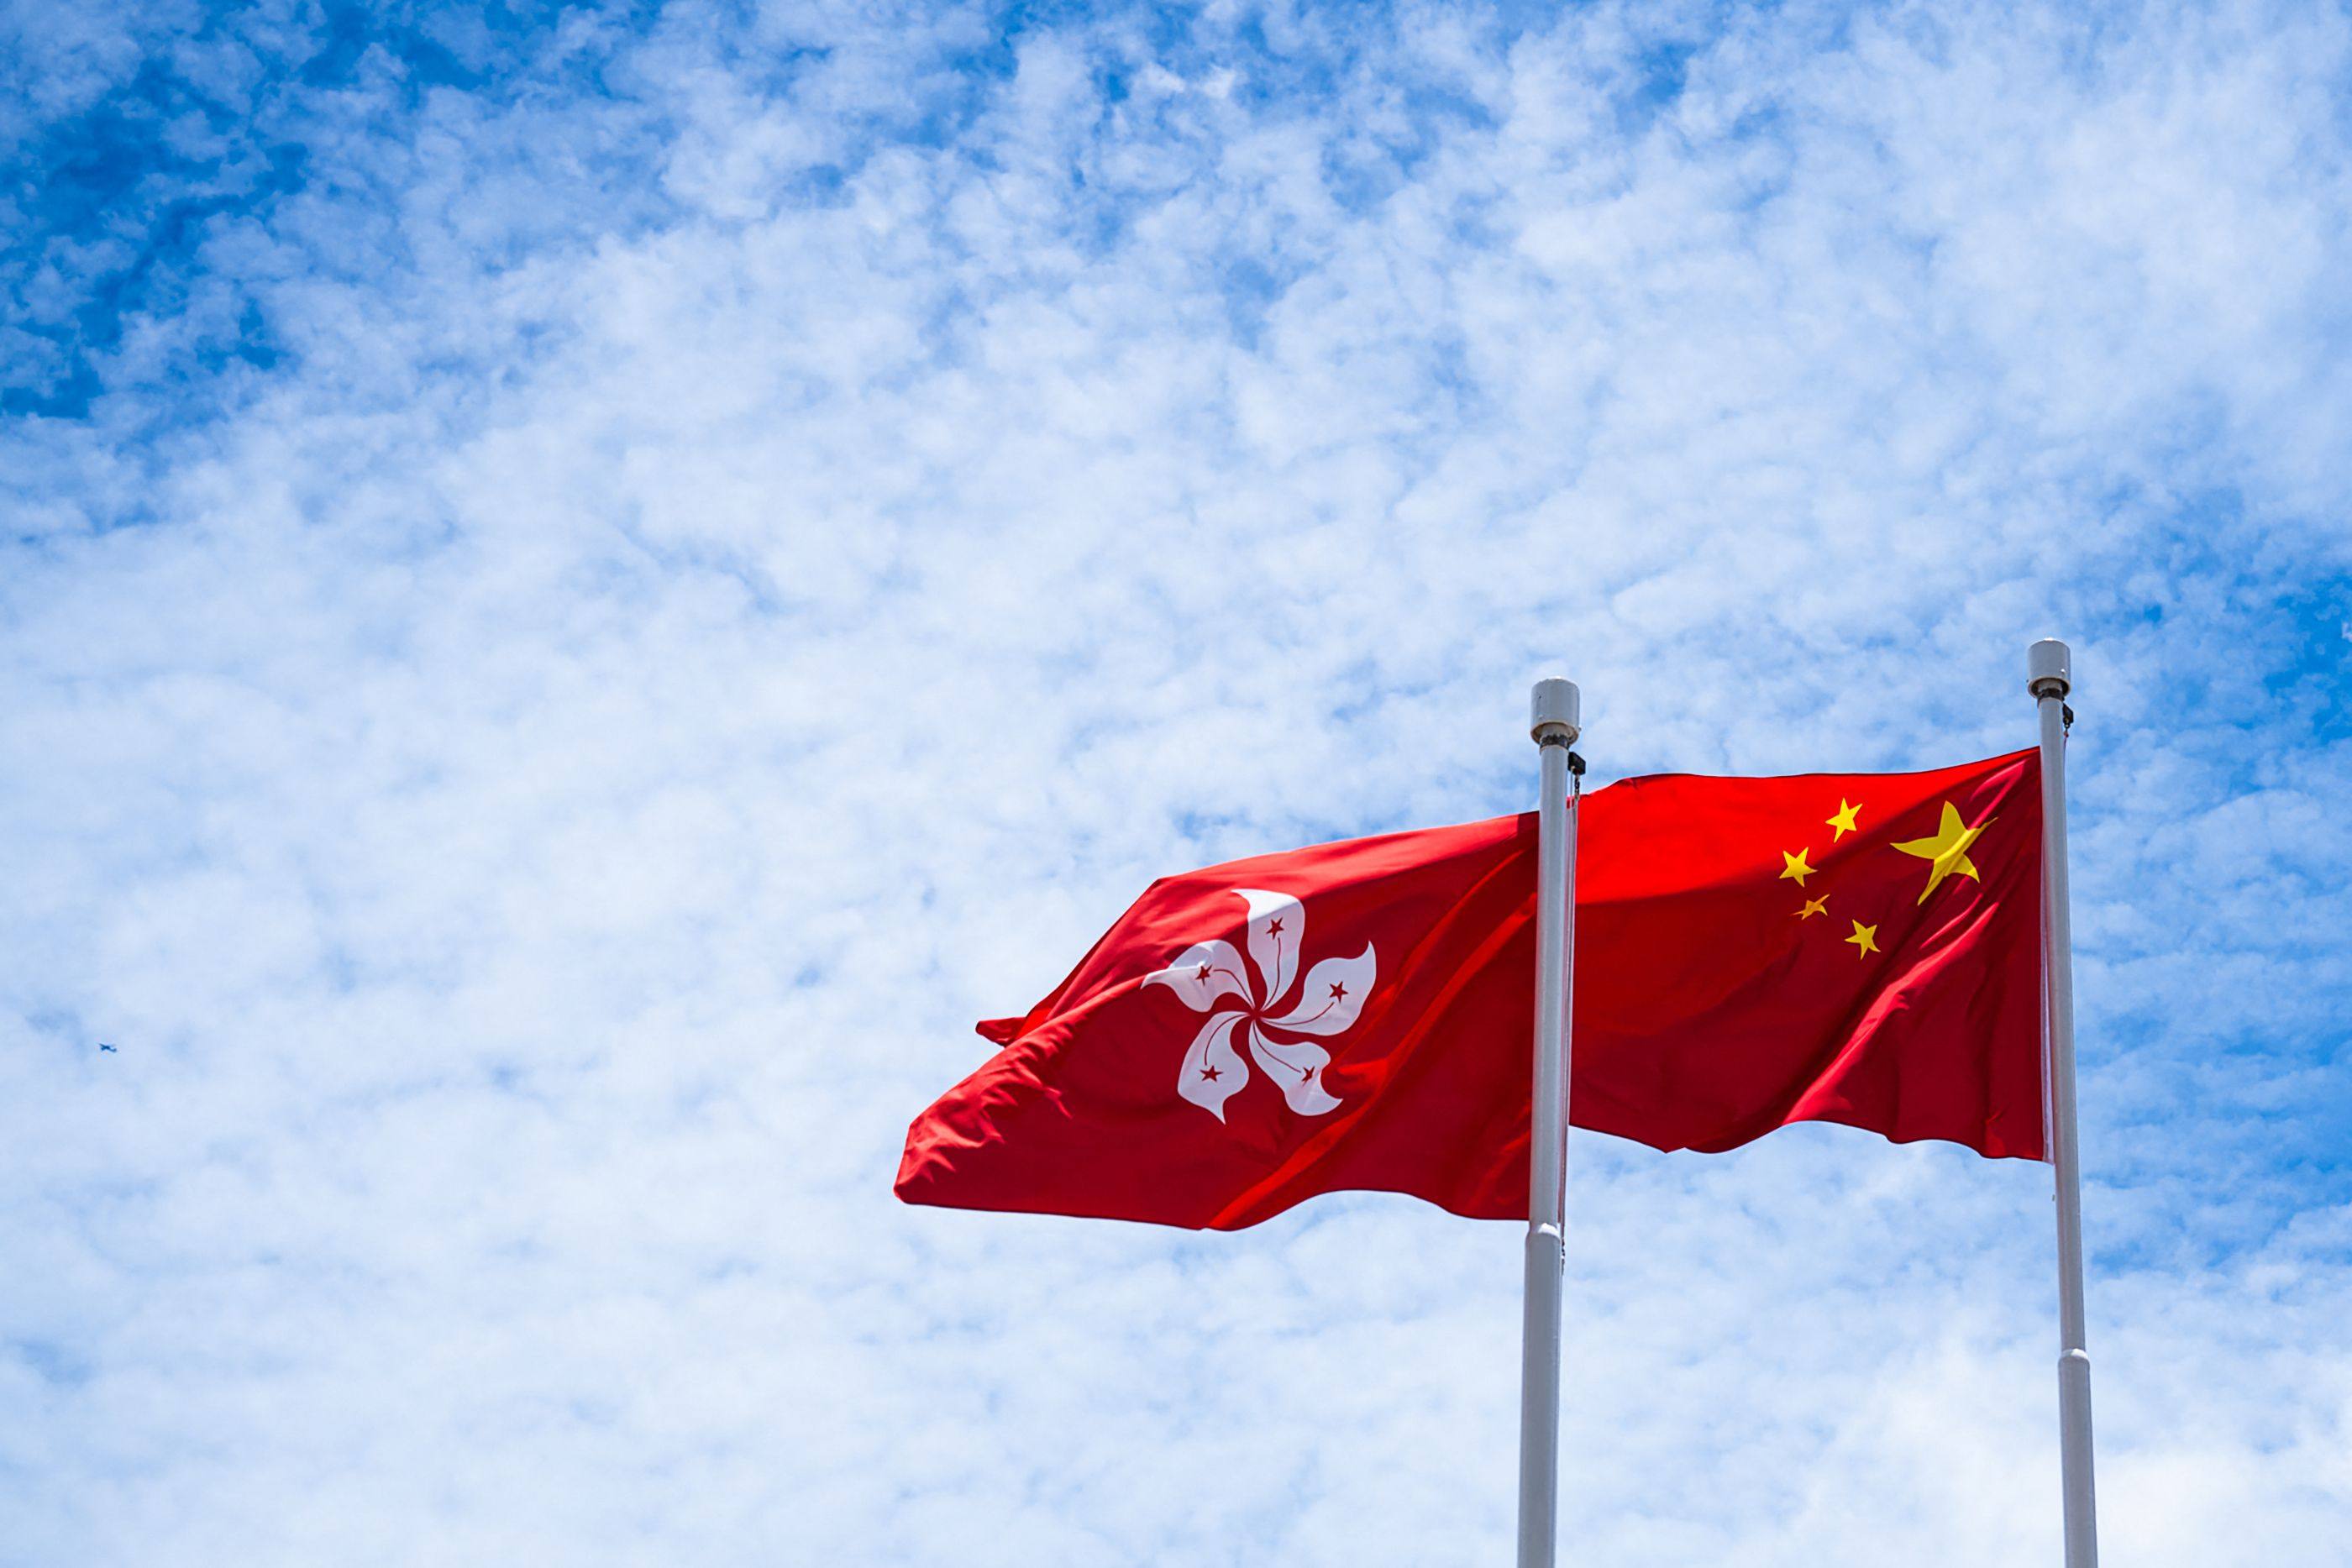 Hong Kong needs to forge closer links with mainland China to take advantage of opportunities, lawmakers say. Photo: AFP